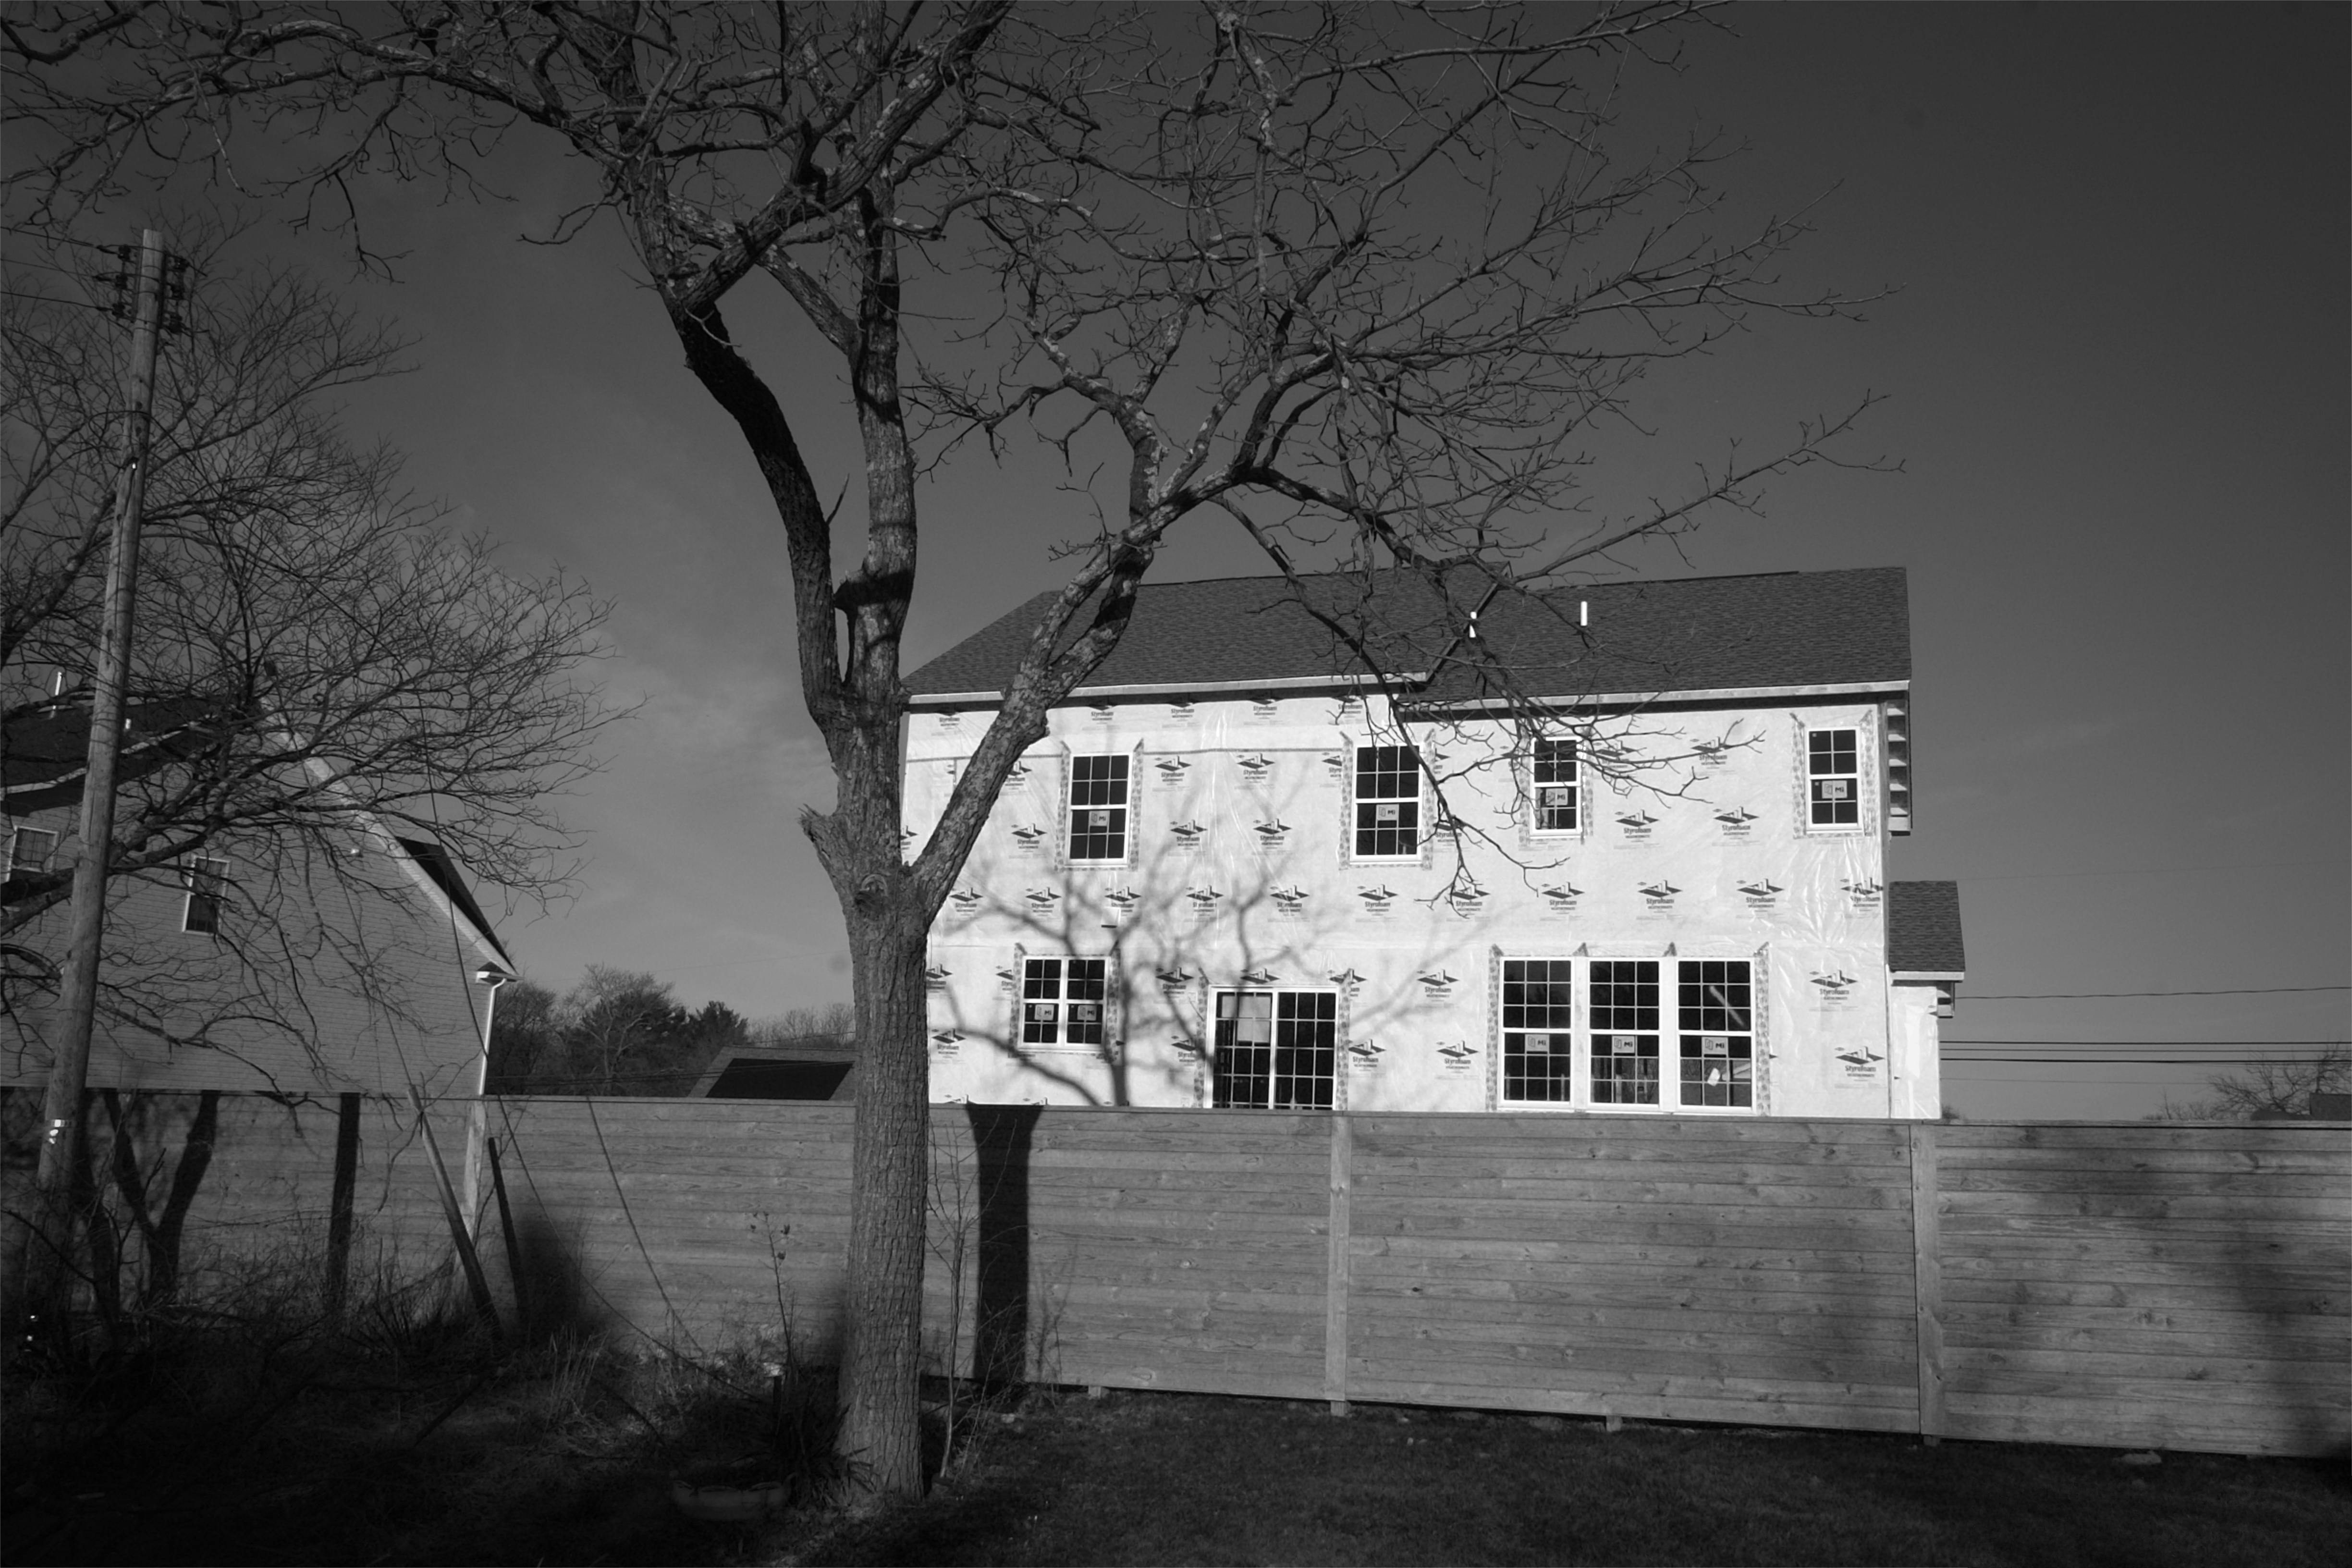 Black and white photo of a house under construction (wrapped in Tyvek) behind a tree and wooden fence. The tree casts a dark shadow against the fence and house.